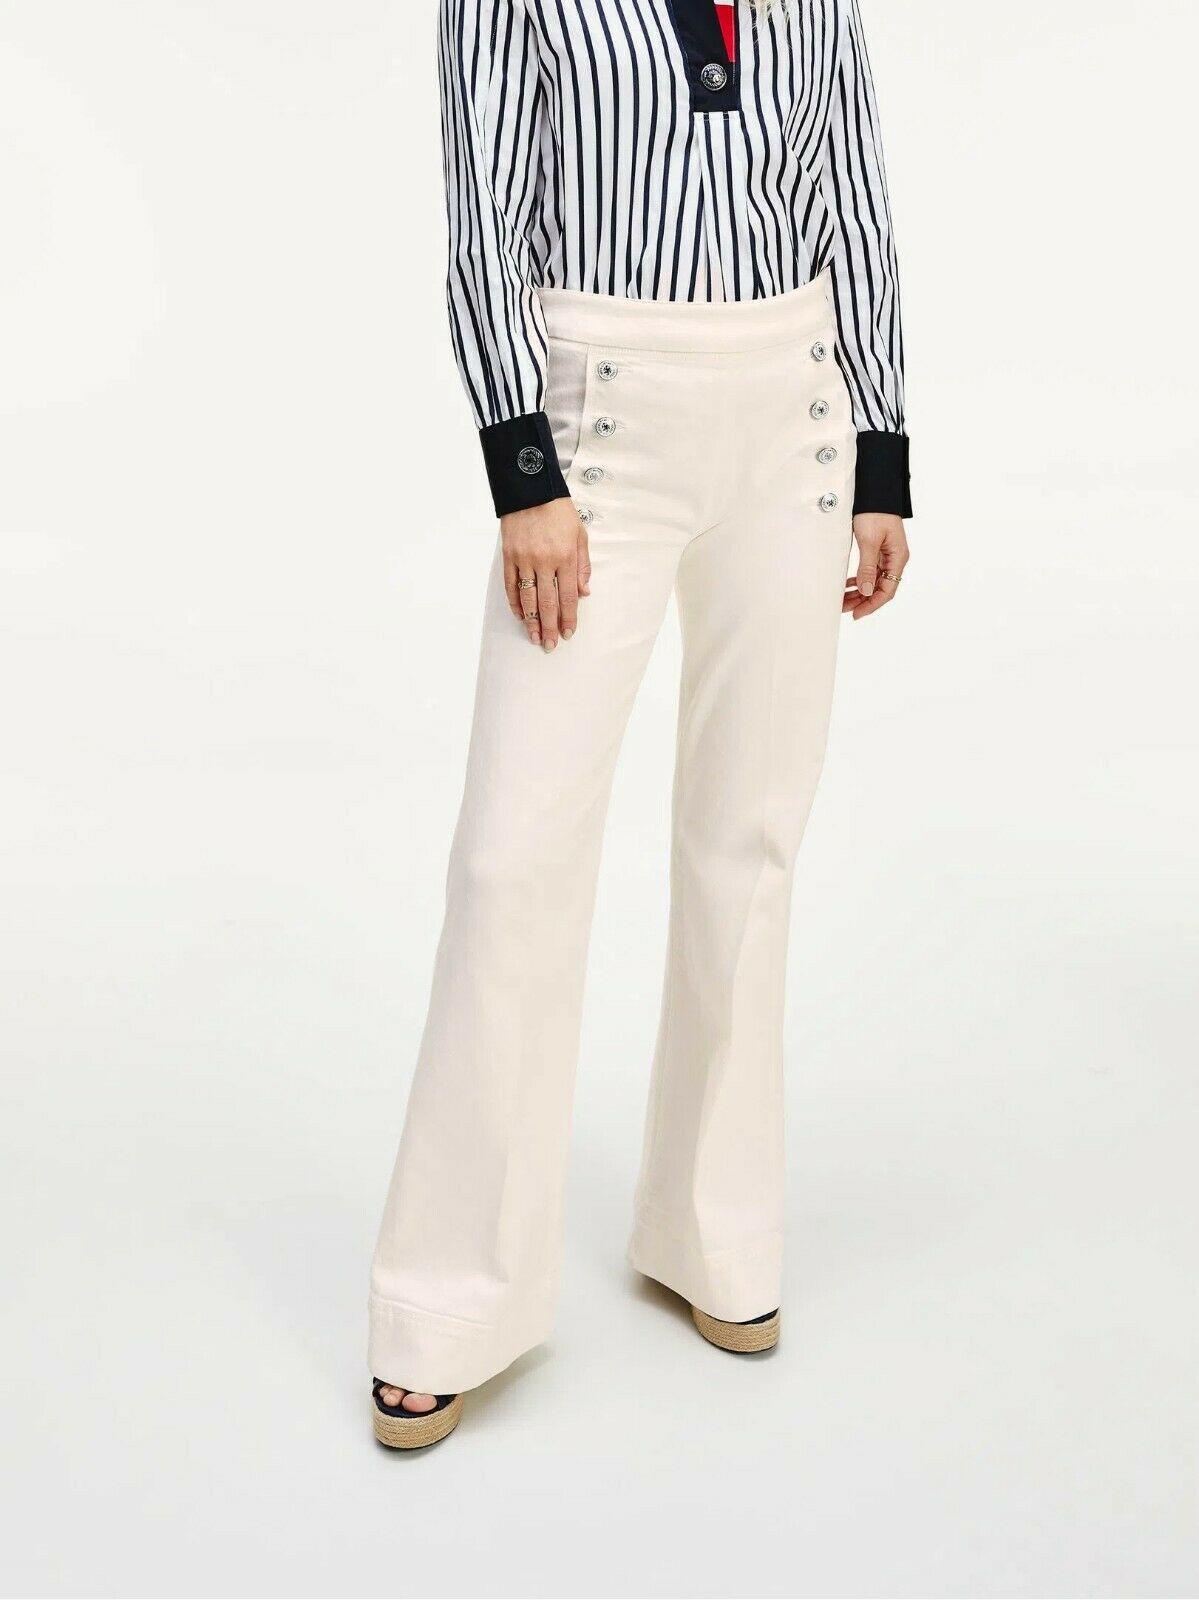 Tommy Hilfiger Icon Sailor High Waist Flare Jeans Off White 35" Inseam Size US 4 - SVNYFancy